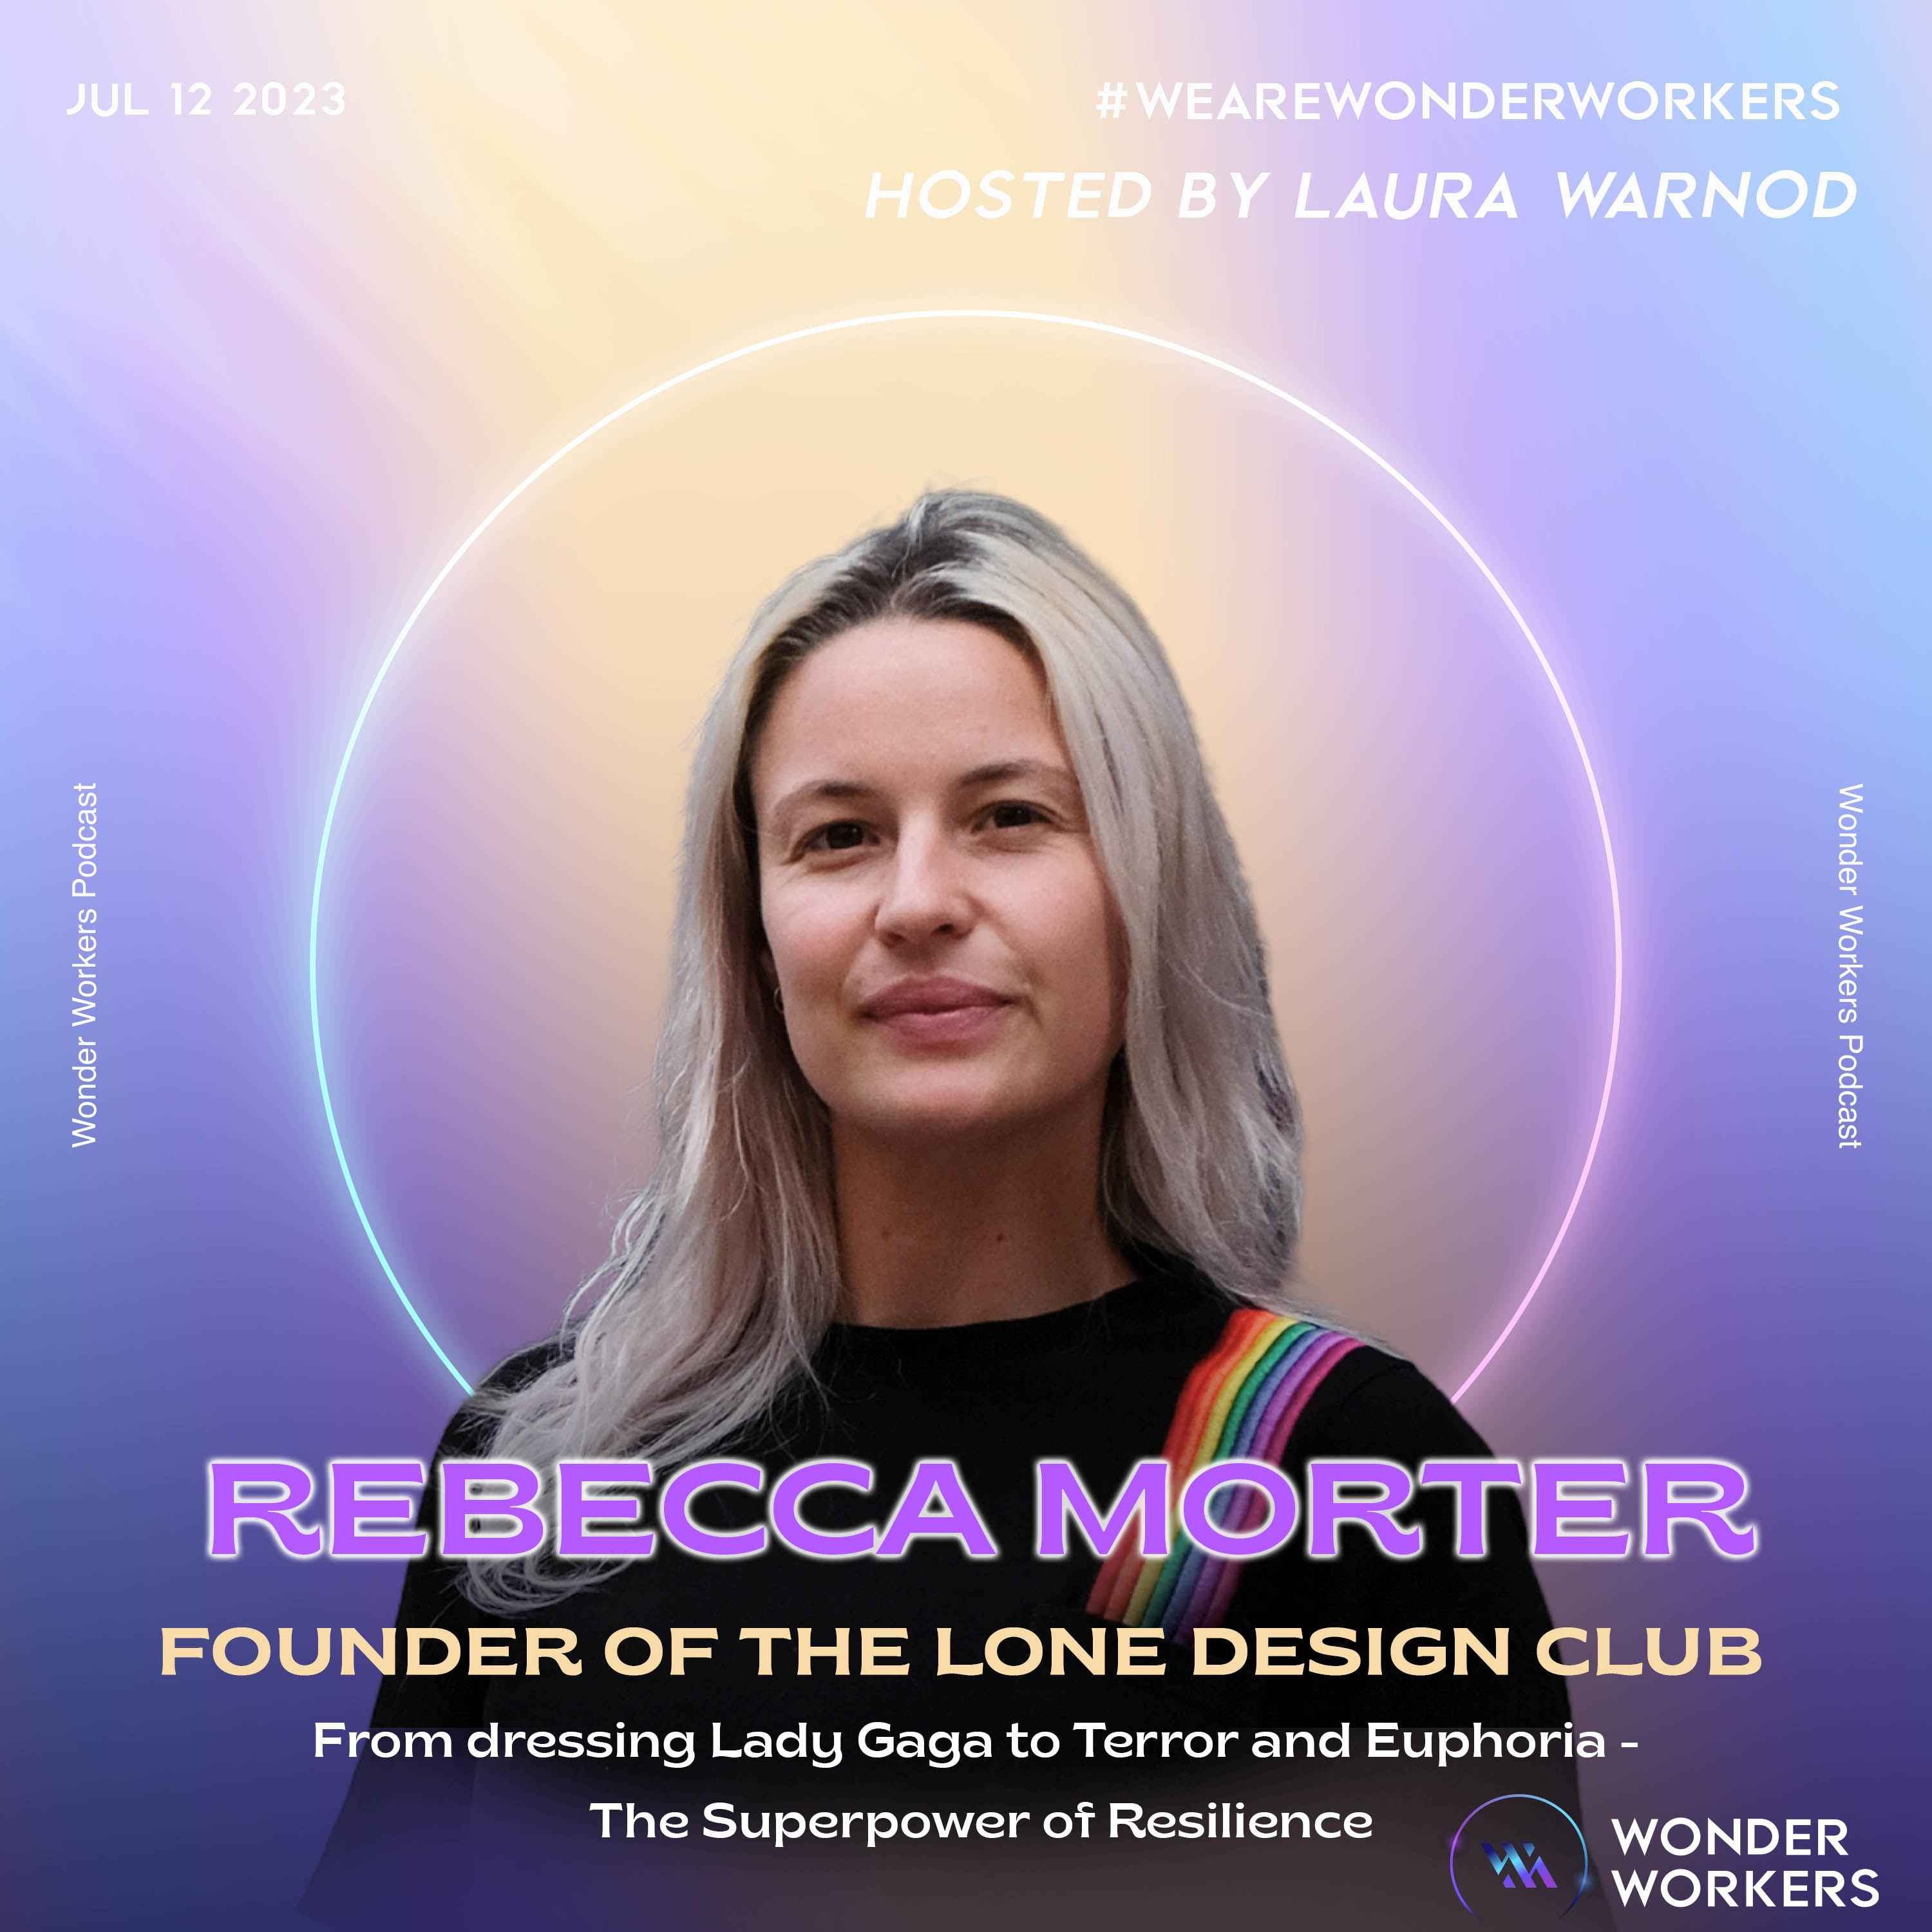 WonderWorkers 9: Rebecca Morter, from dressing Lady Gaga to terror and euphoria - The Superpower of Resilience